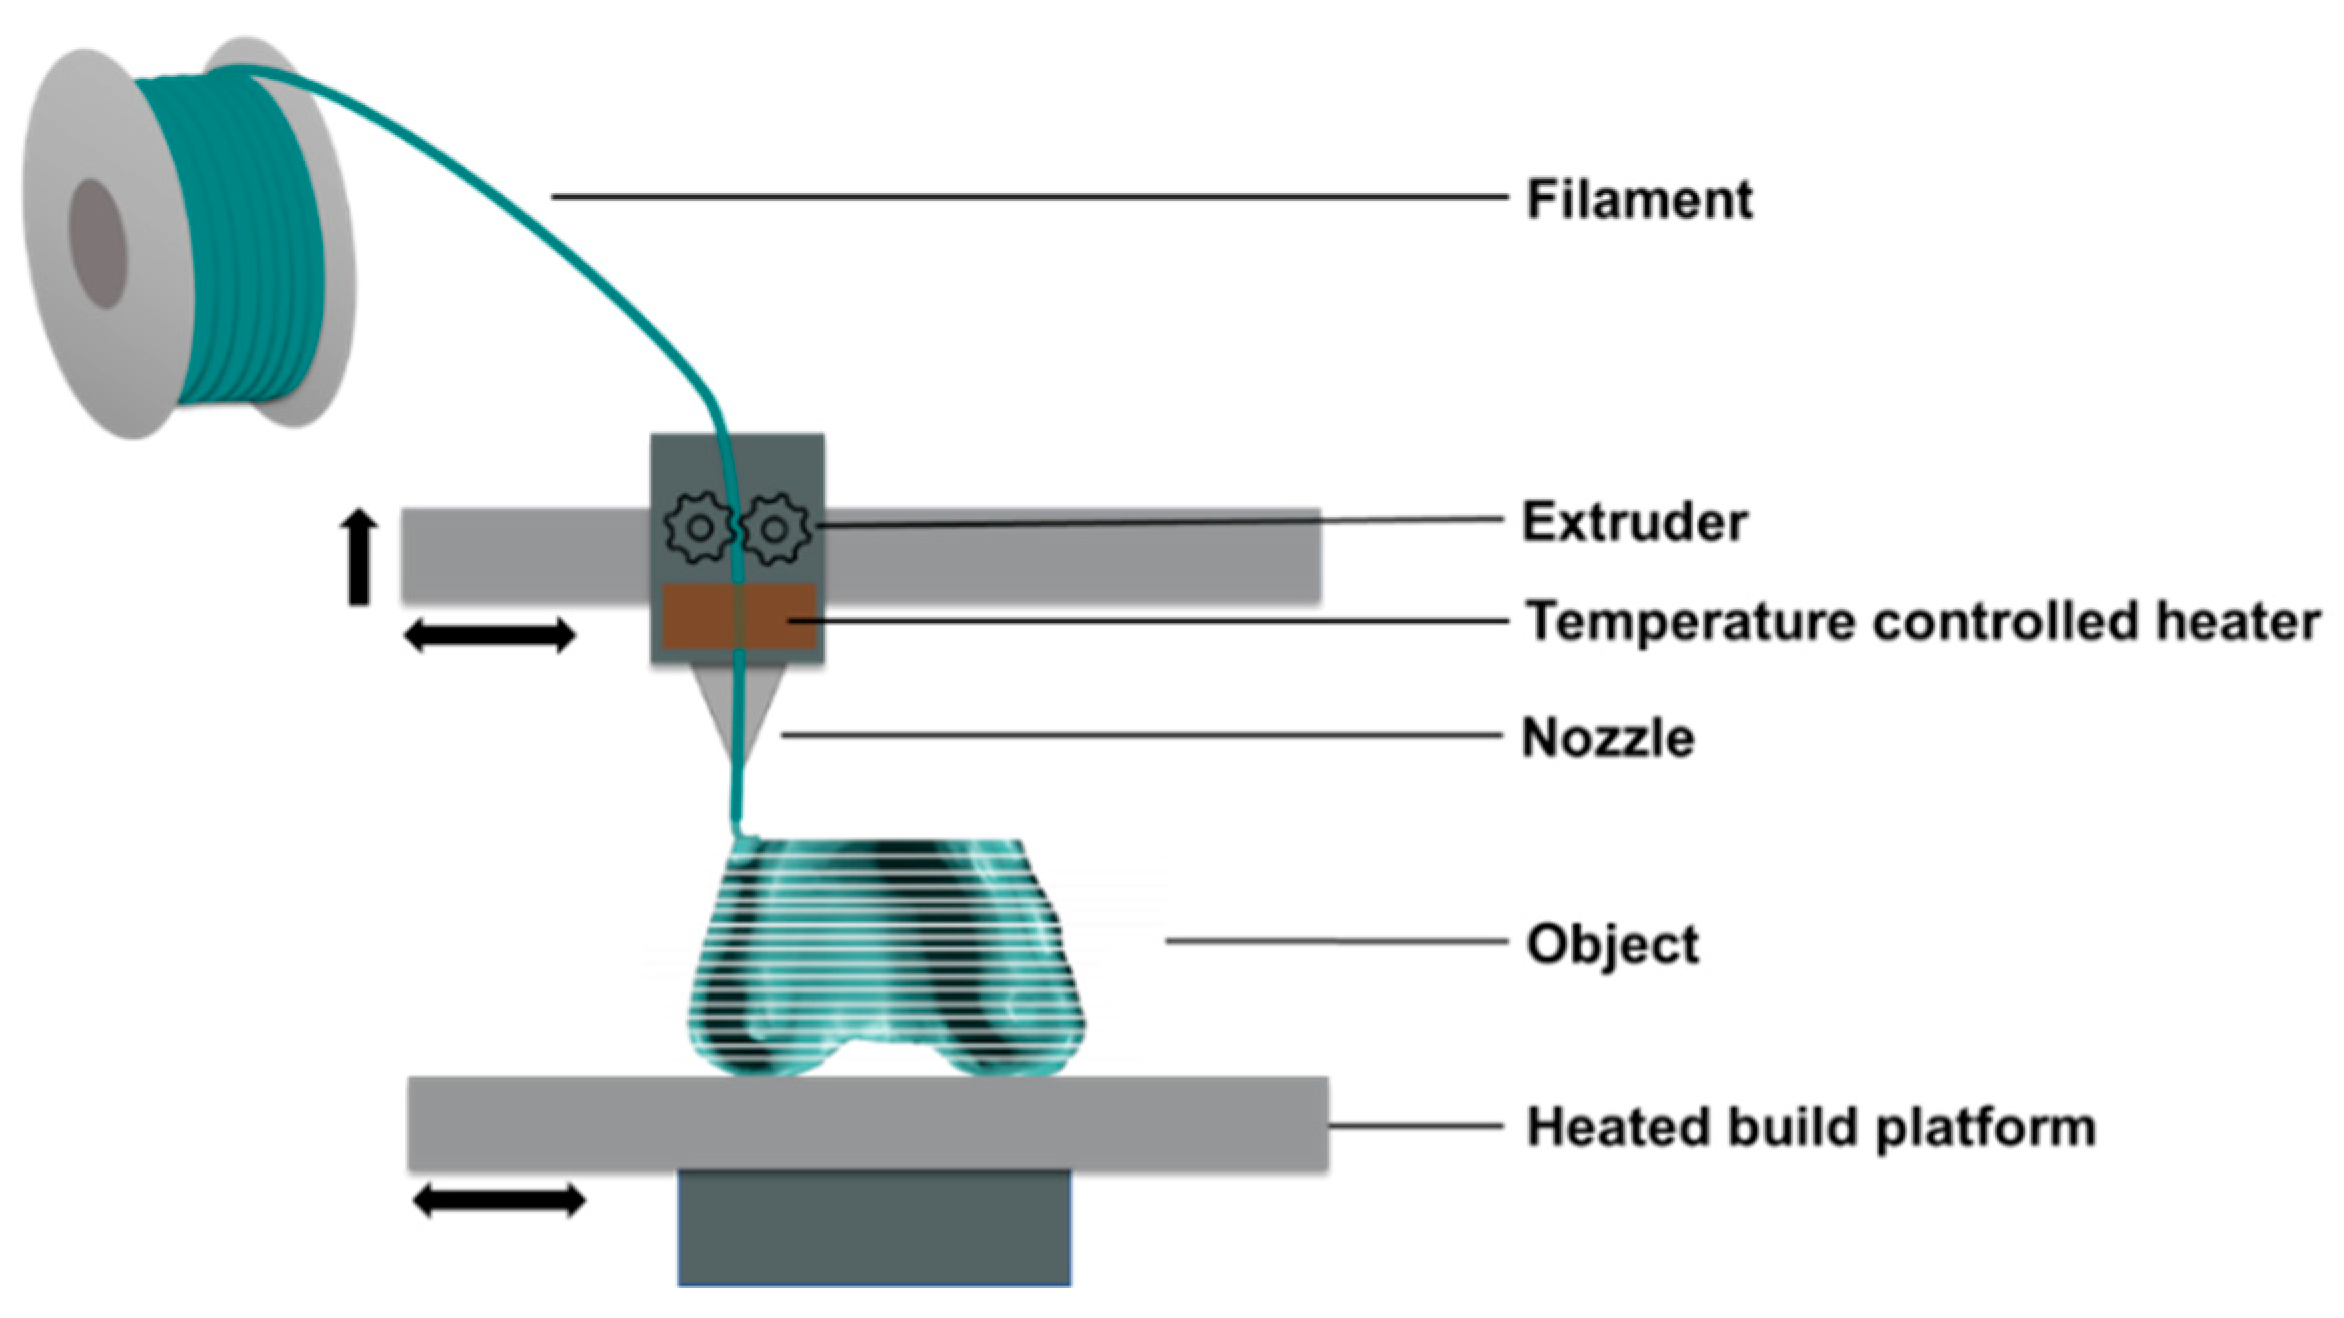 filament - No extrusion, but manual extrusion works - 3D Printing Stack  Exchange